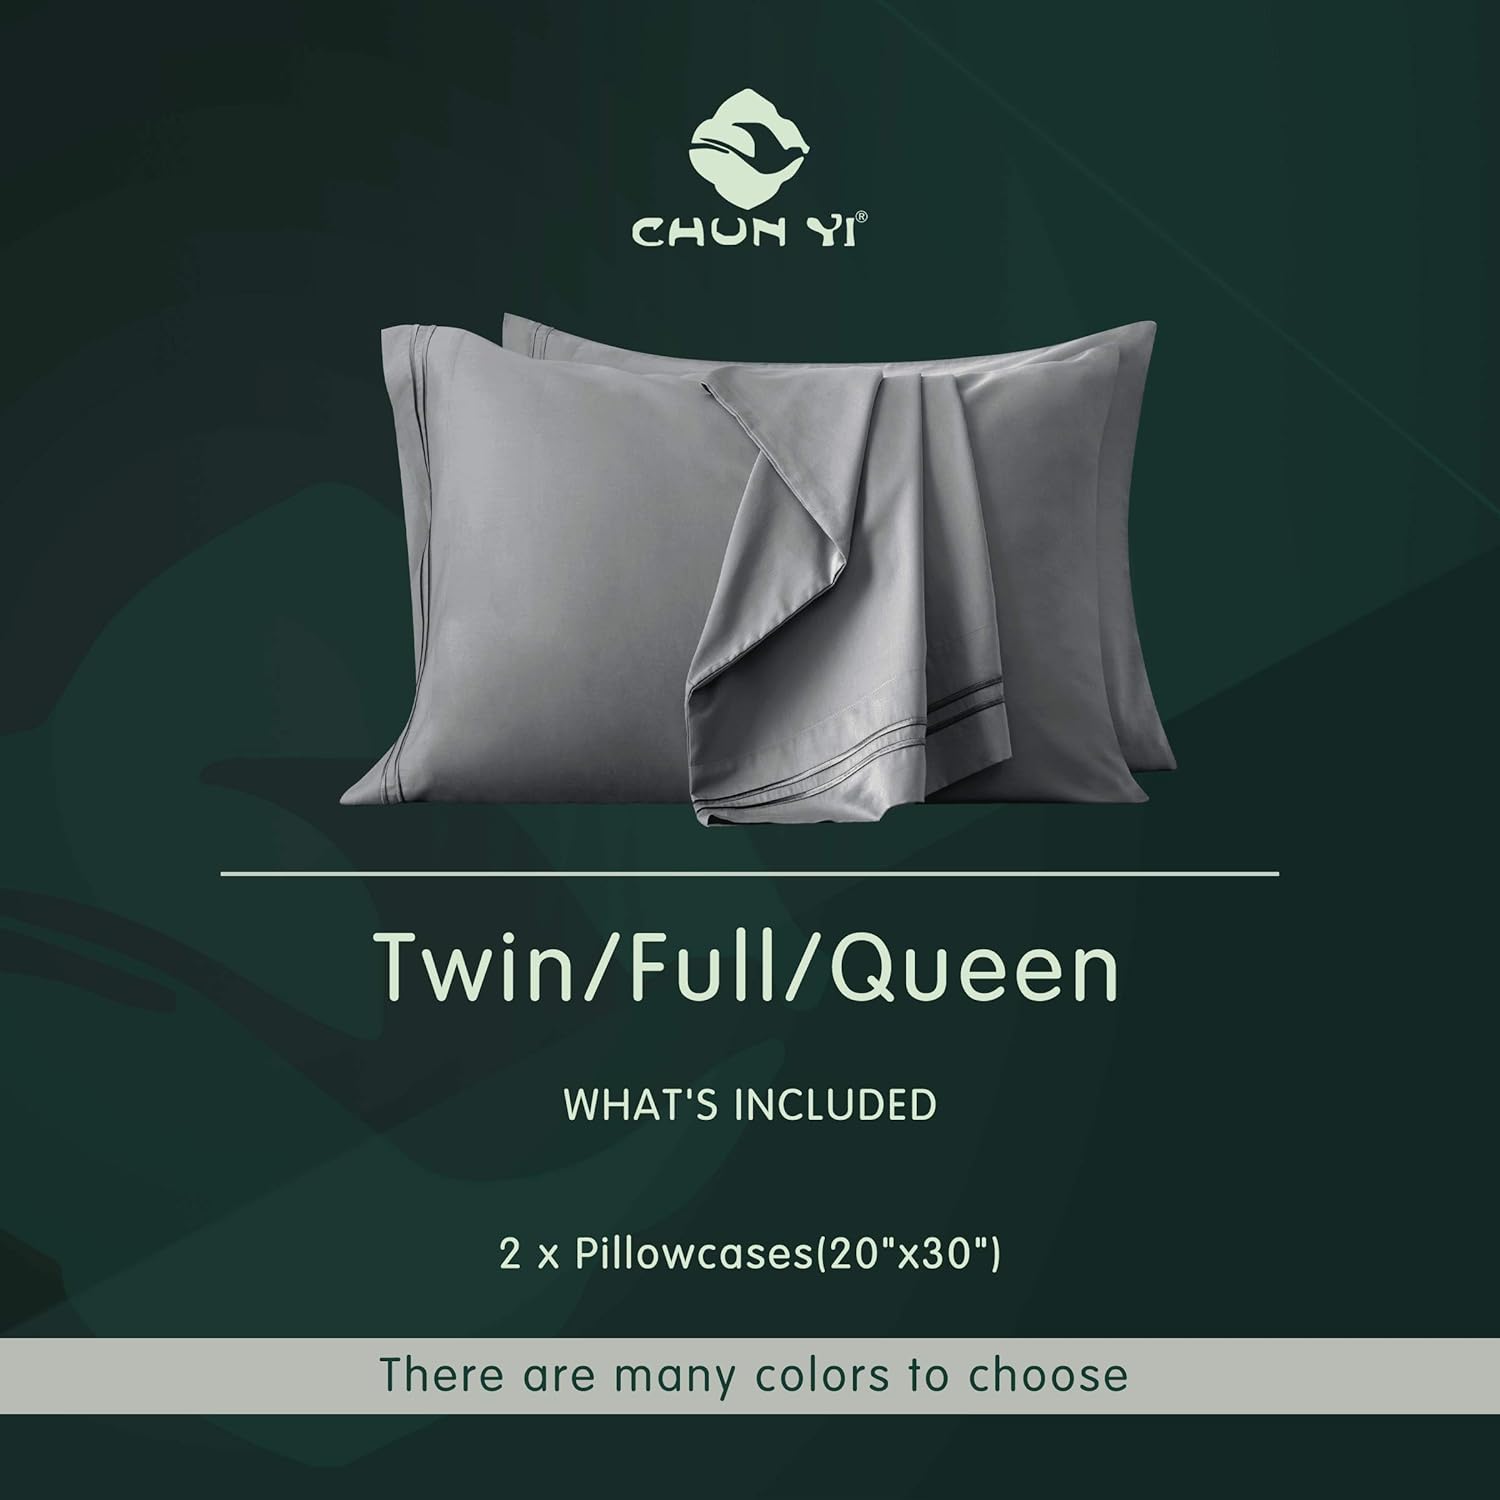 Luxury Cotton Pillowcase Set for Hair and Skin - Tencel Shams 2-Pack, Ultra-Soft Pillow Covers with Envelope Closure